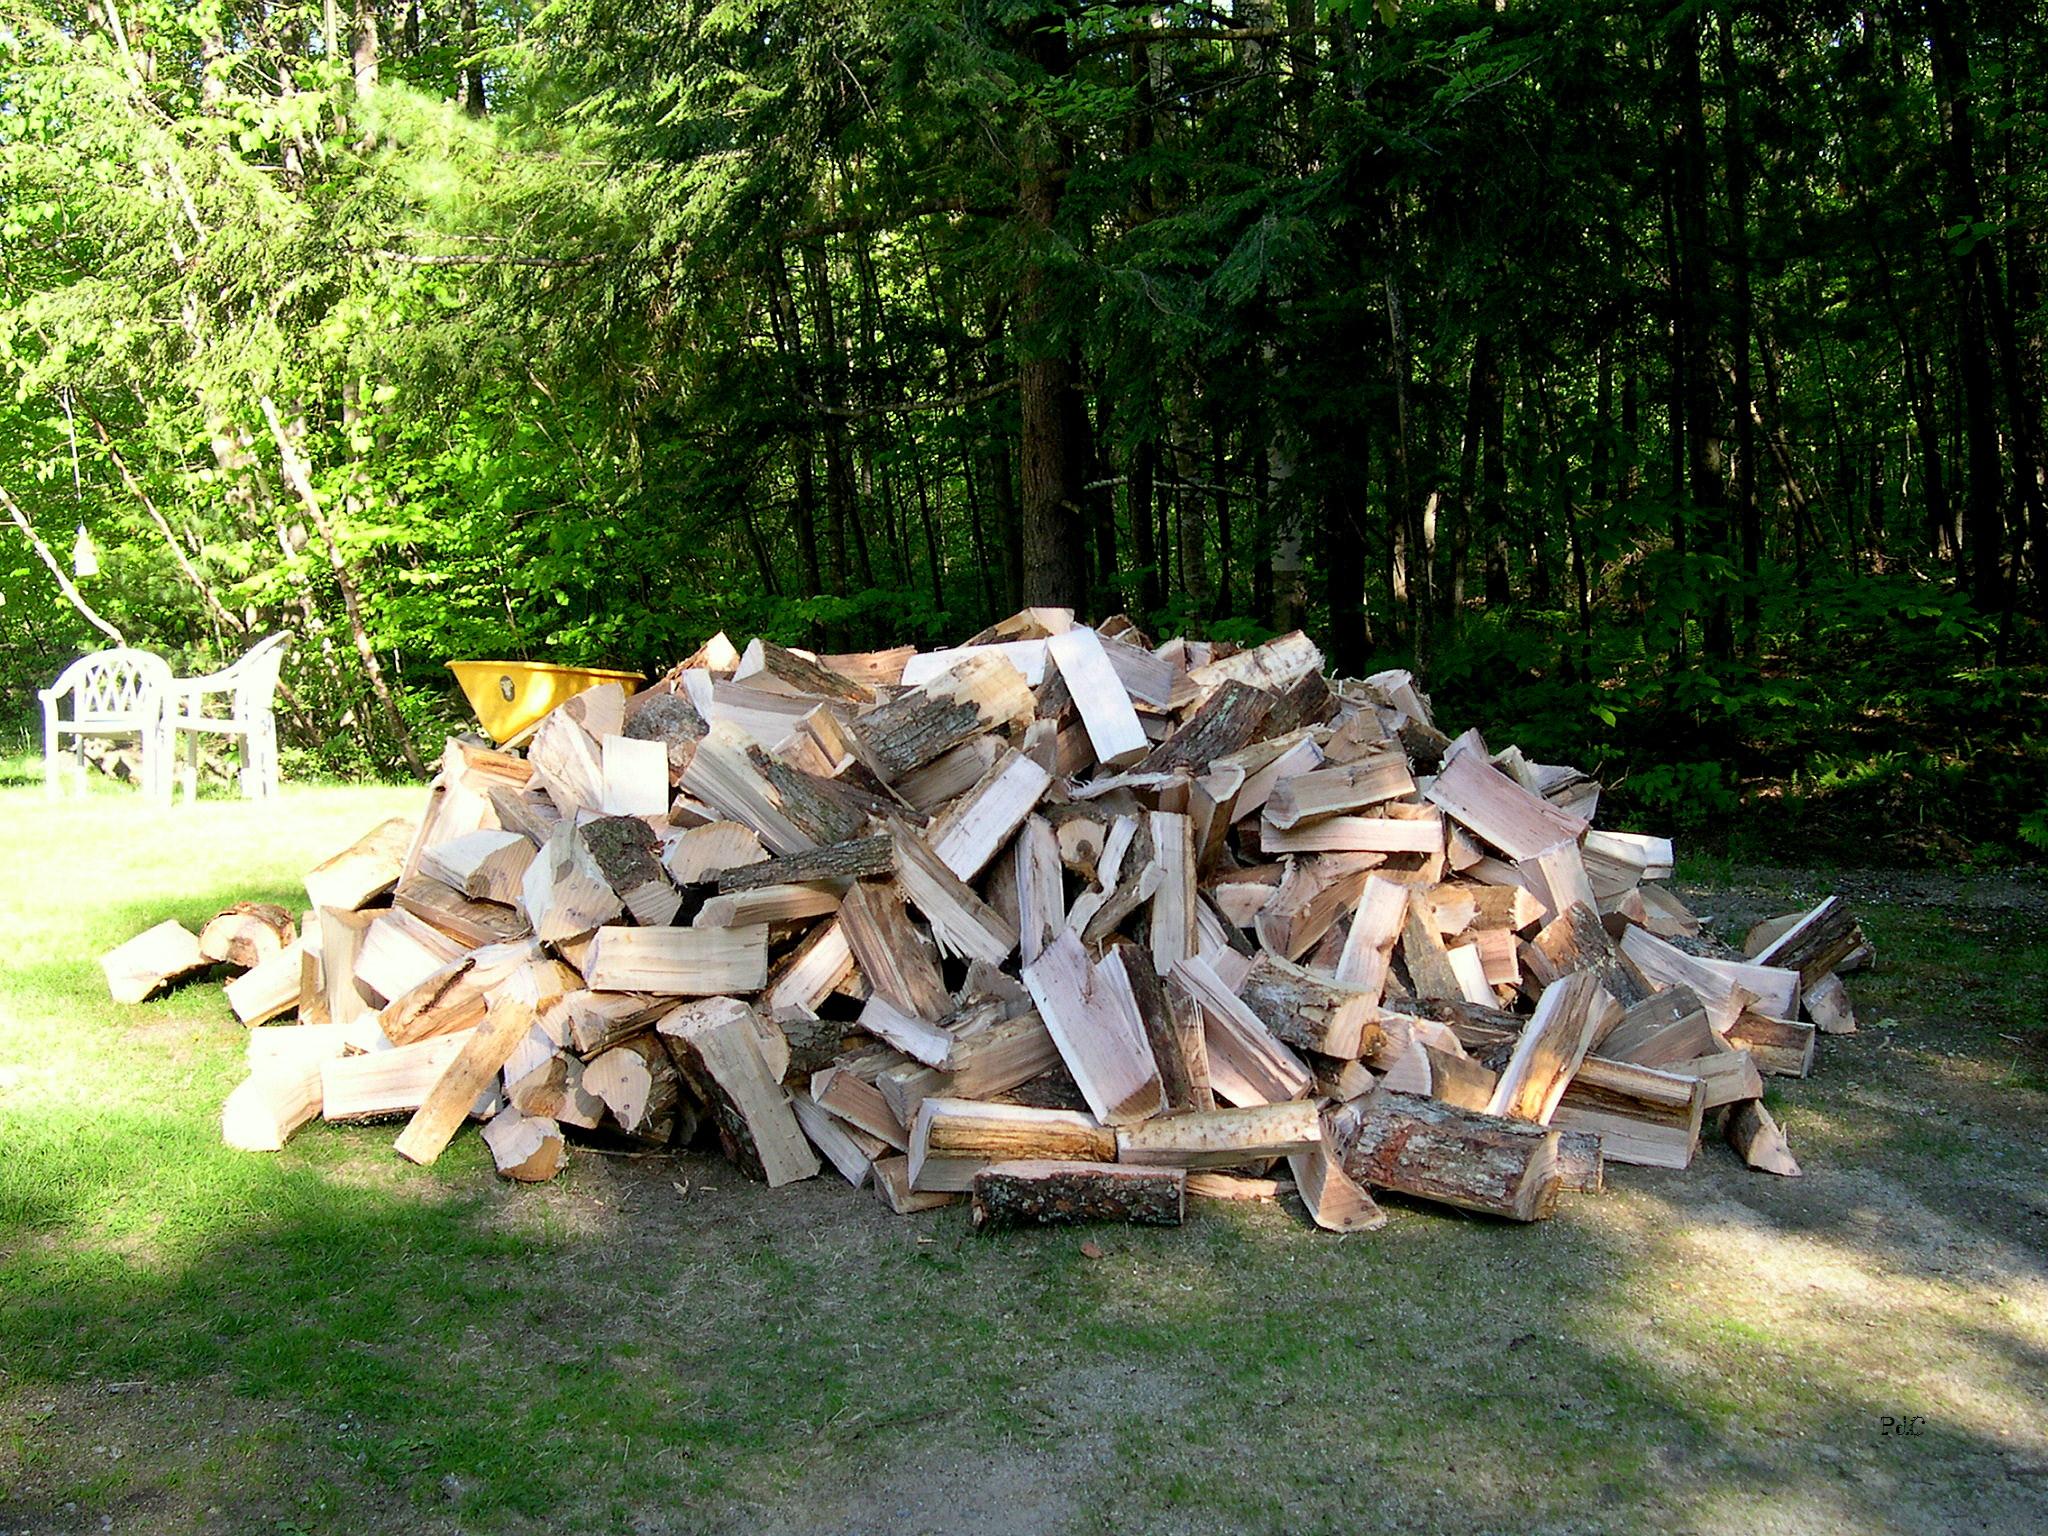 wood pile-cut wood-wood delivery-firewood – New England's Narrow Road